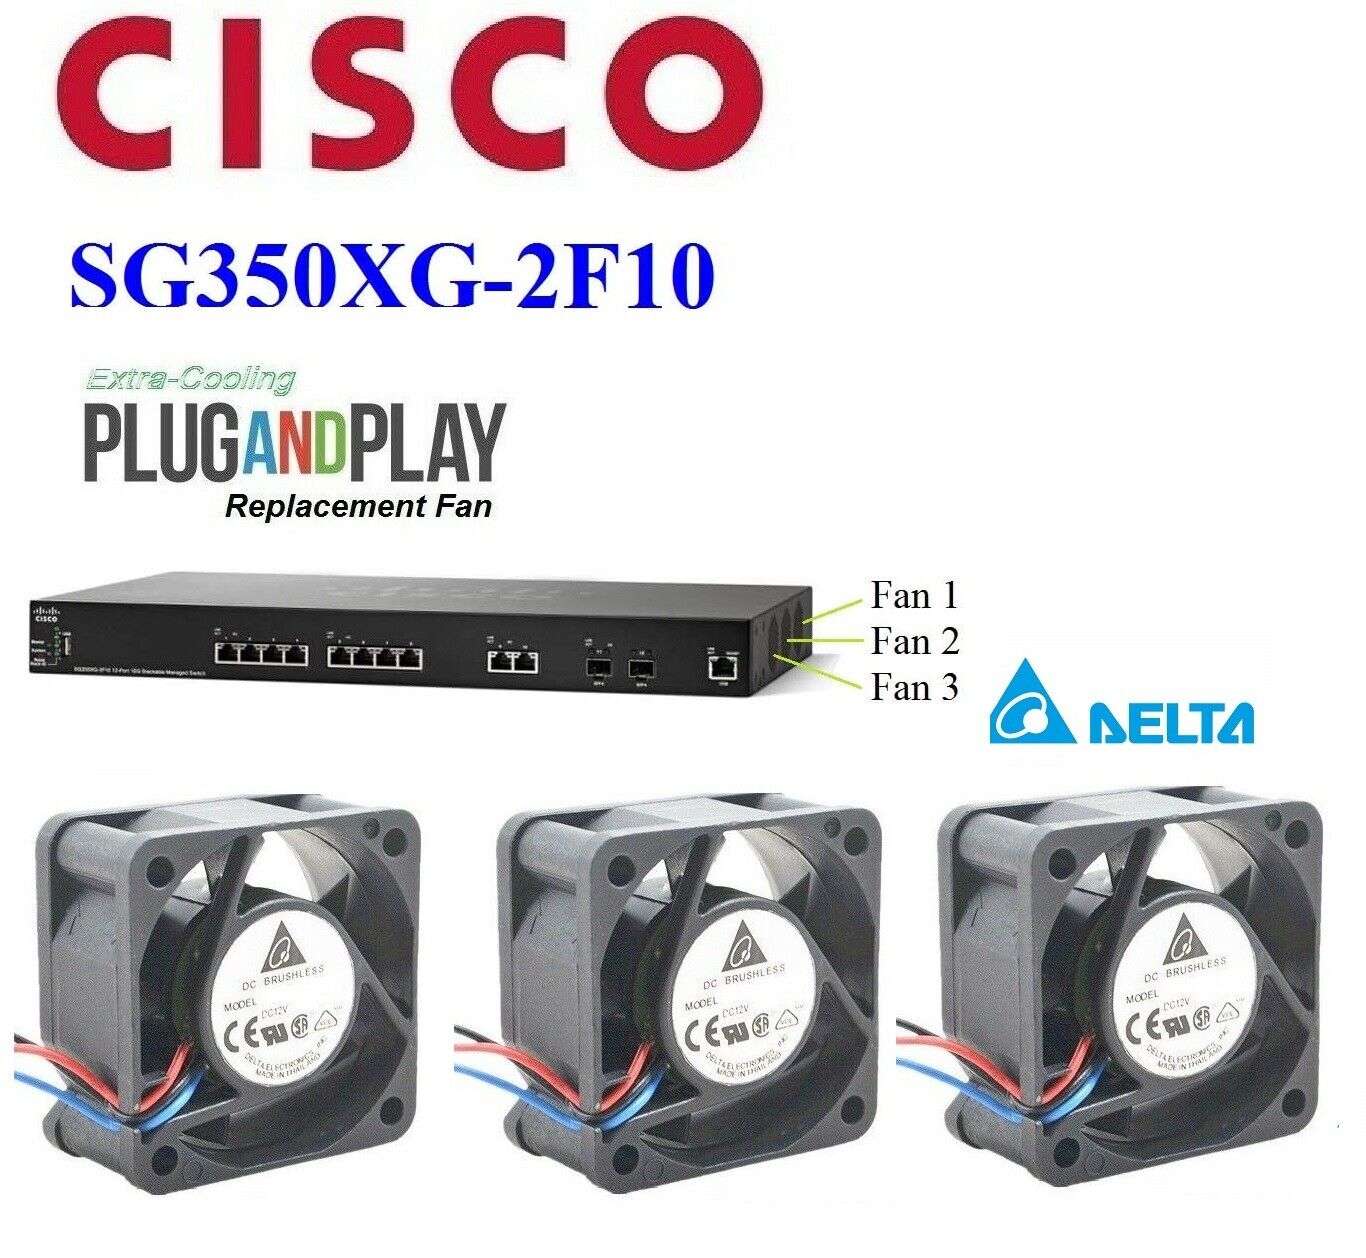 Set of 3x new Delta replacement fans for Cisco SG350XG-2F10